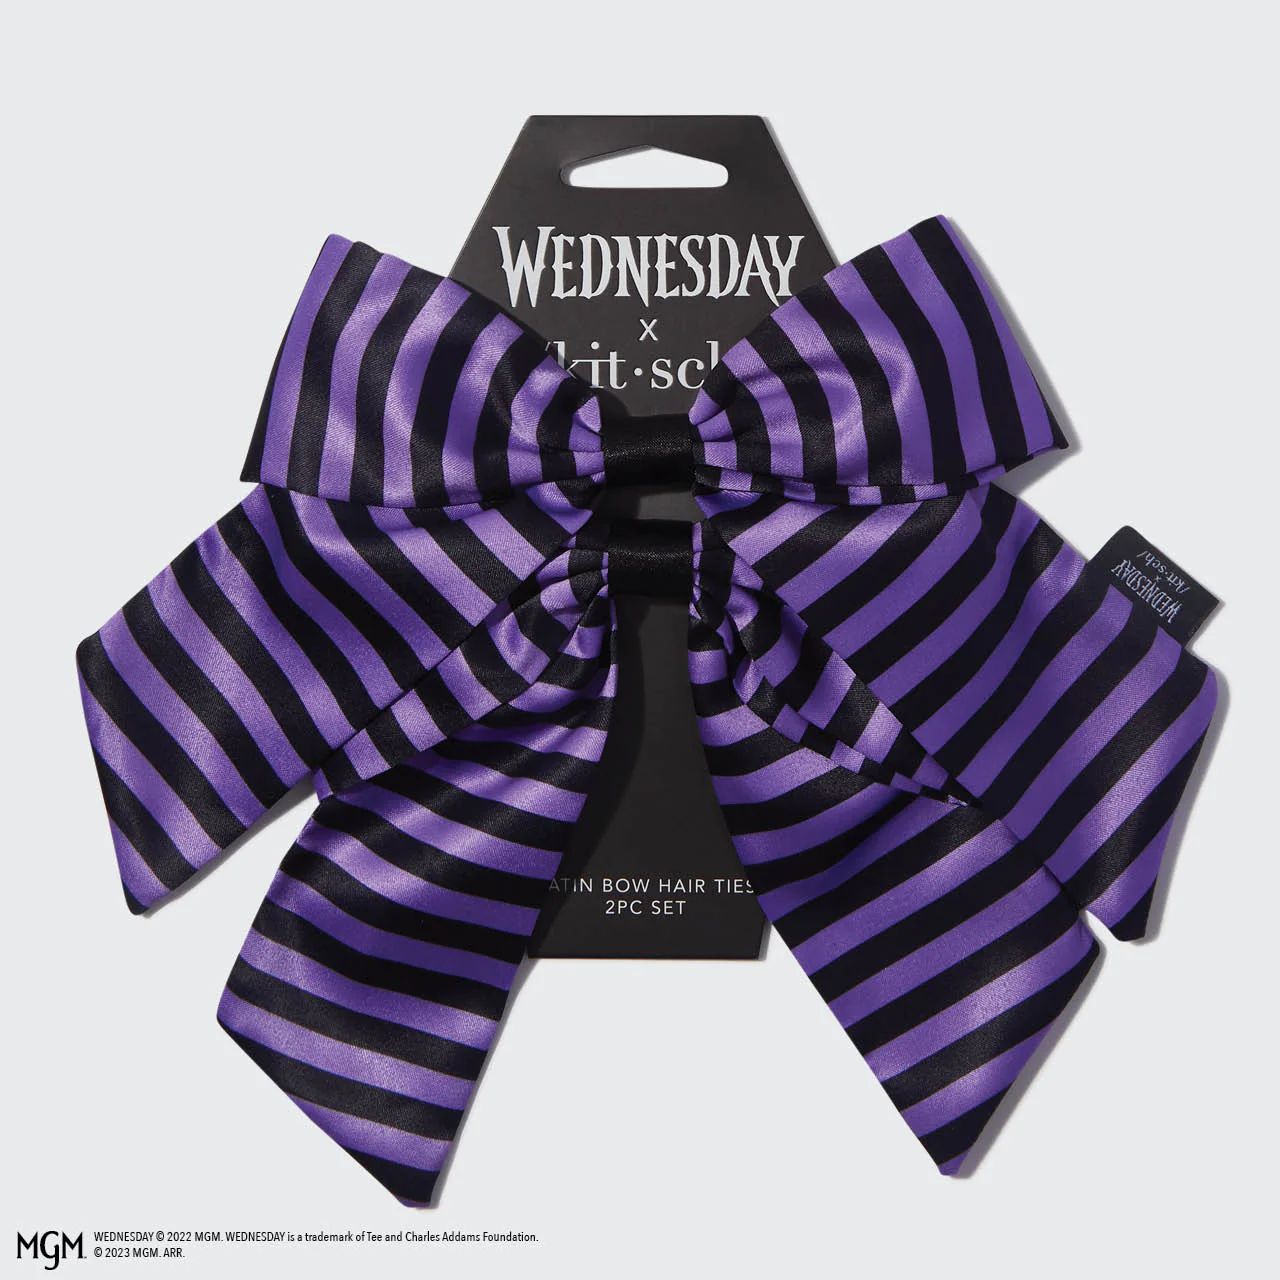 Wednesday x Kitsch Nevermore Bow Hair Ties 2pc Set | Kitsch